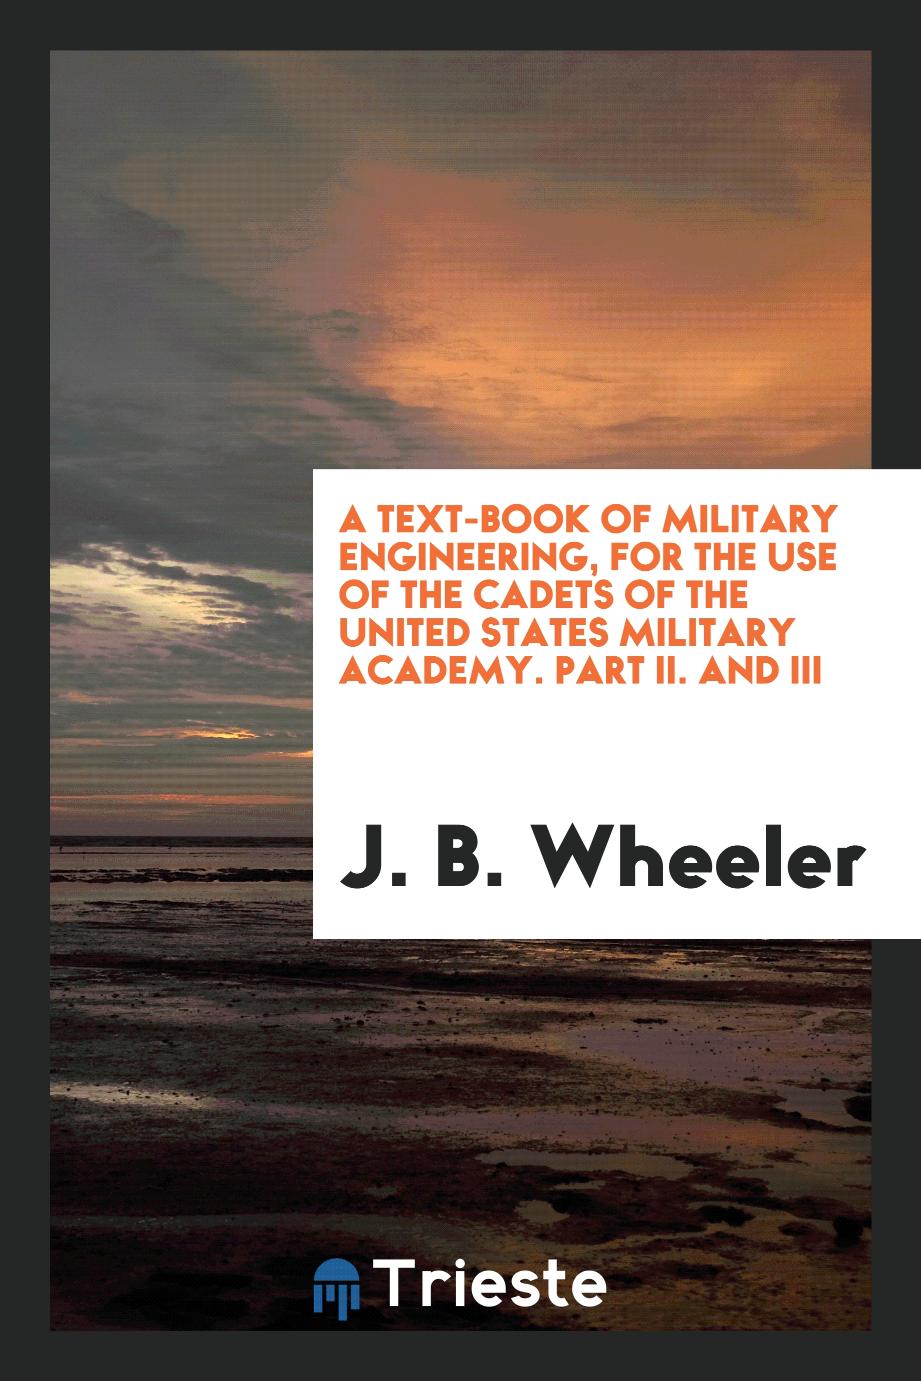 A Text-Book of Military Engineering, for the Use of the Cadets of the United States Military Academy. Part II. And III